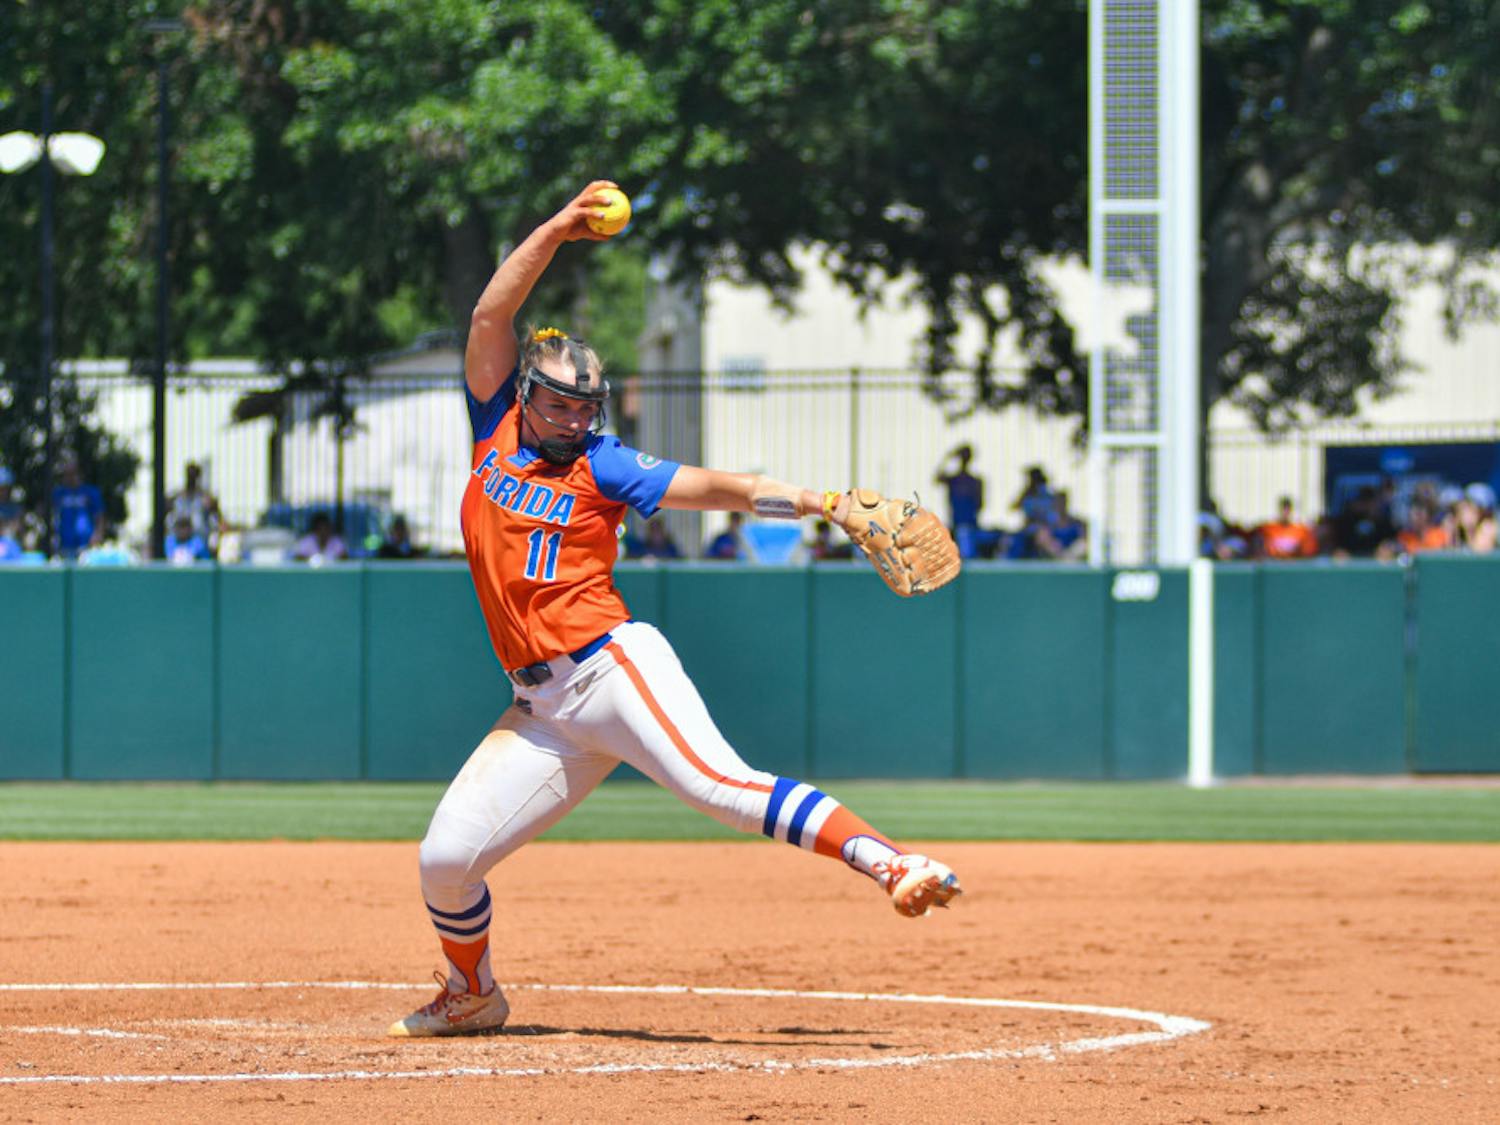 Despite tossing nine strikeouts on two hits, Kelly Barnhill's performance was marred by the surrender of two home runs to Oklahoma State pitcher Samantha Show.